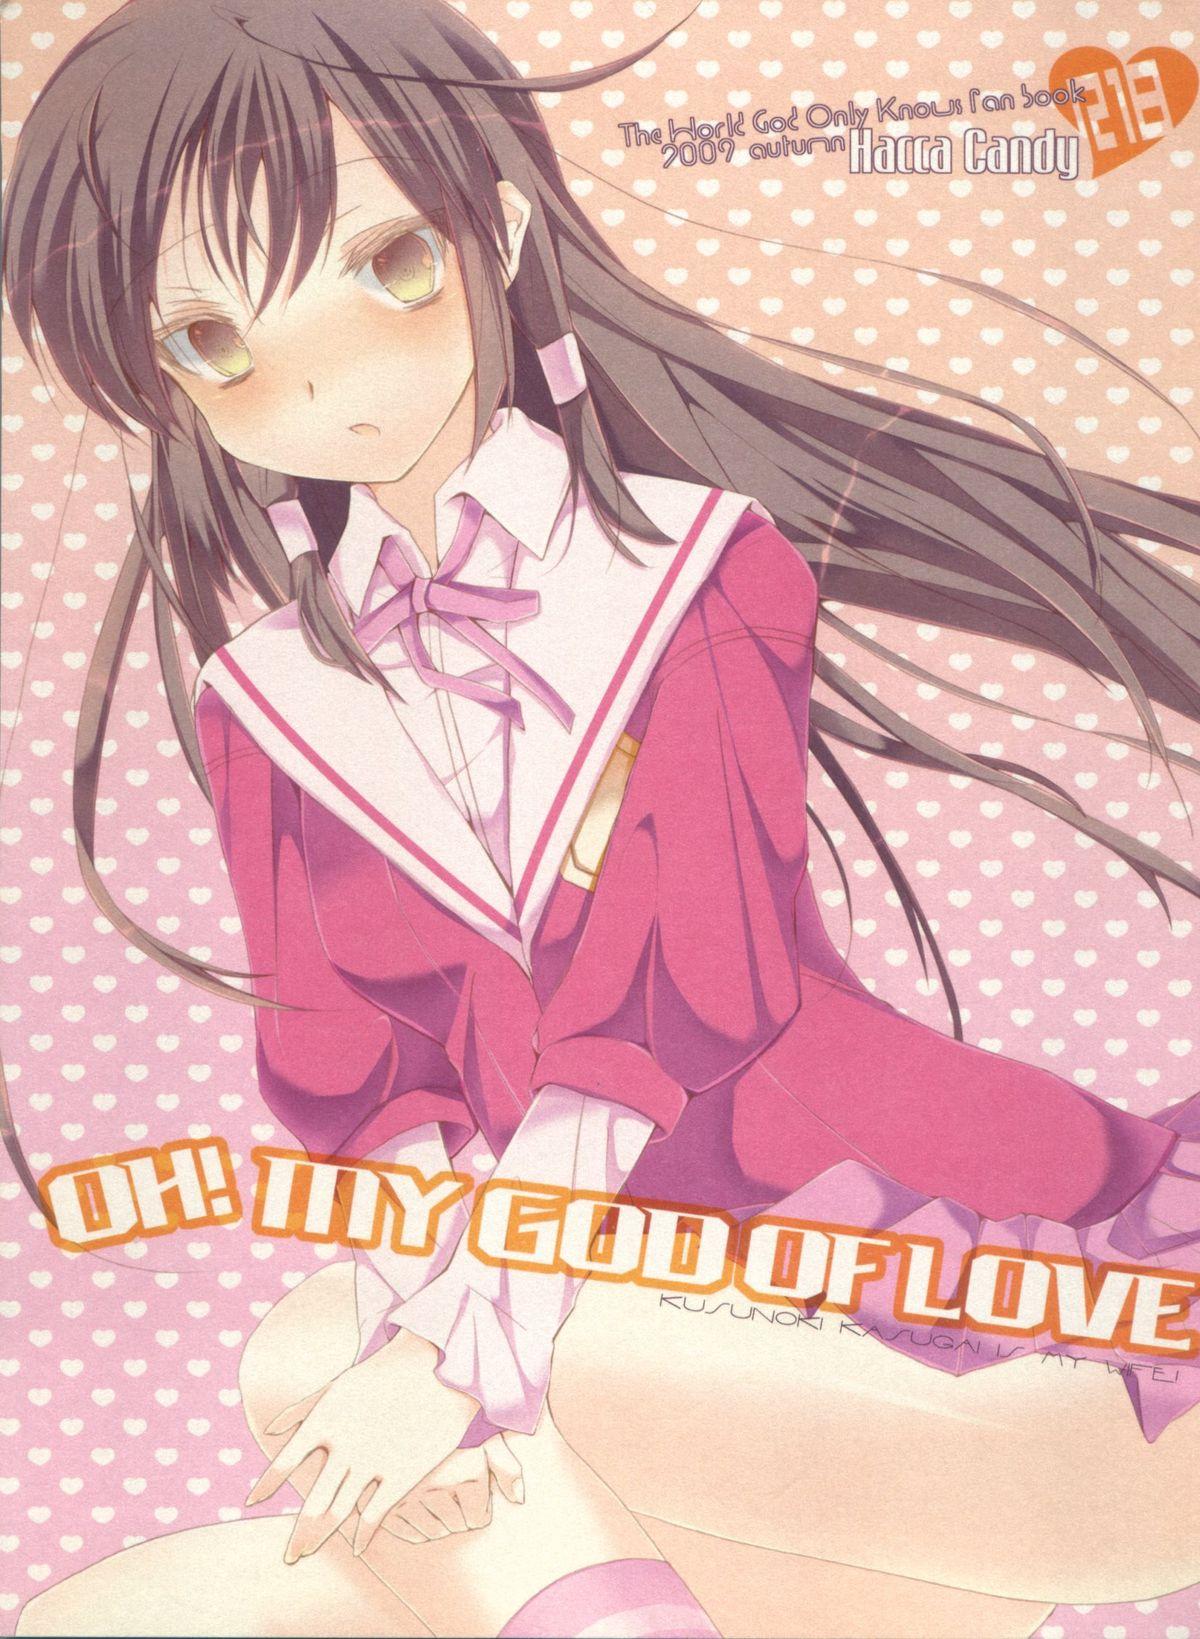 Online OH!MY GOD OF LOVE - The world god only knows Colombia - Page 1